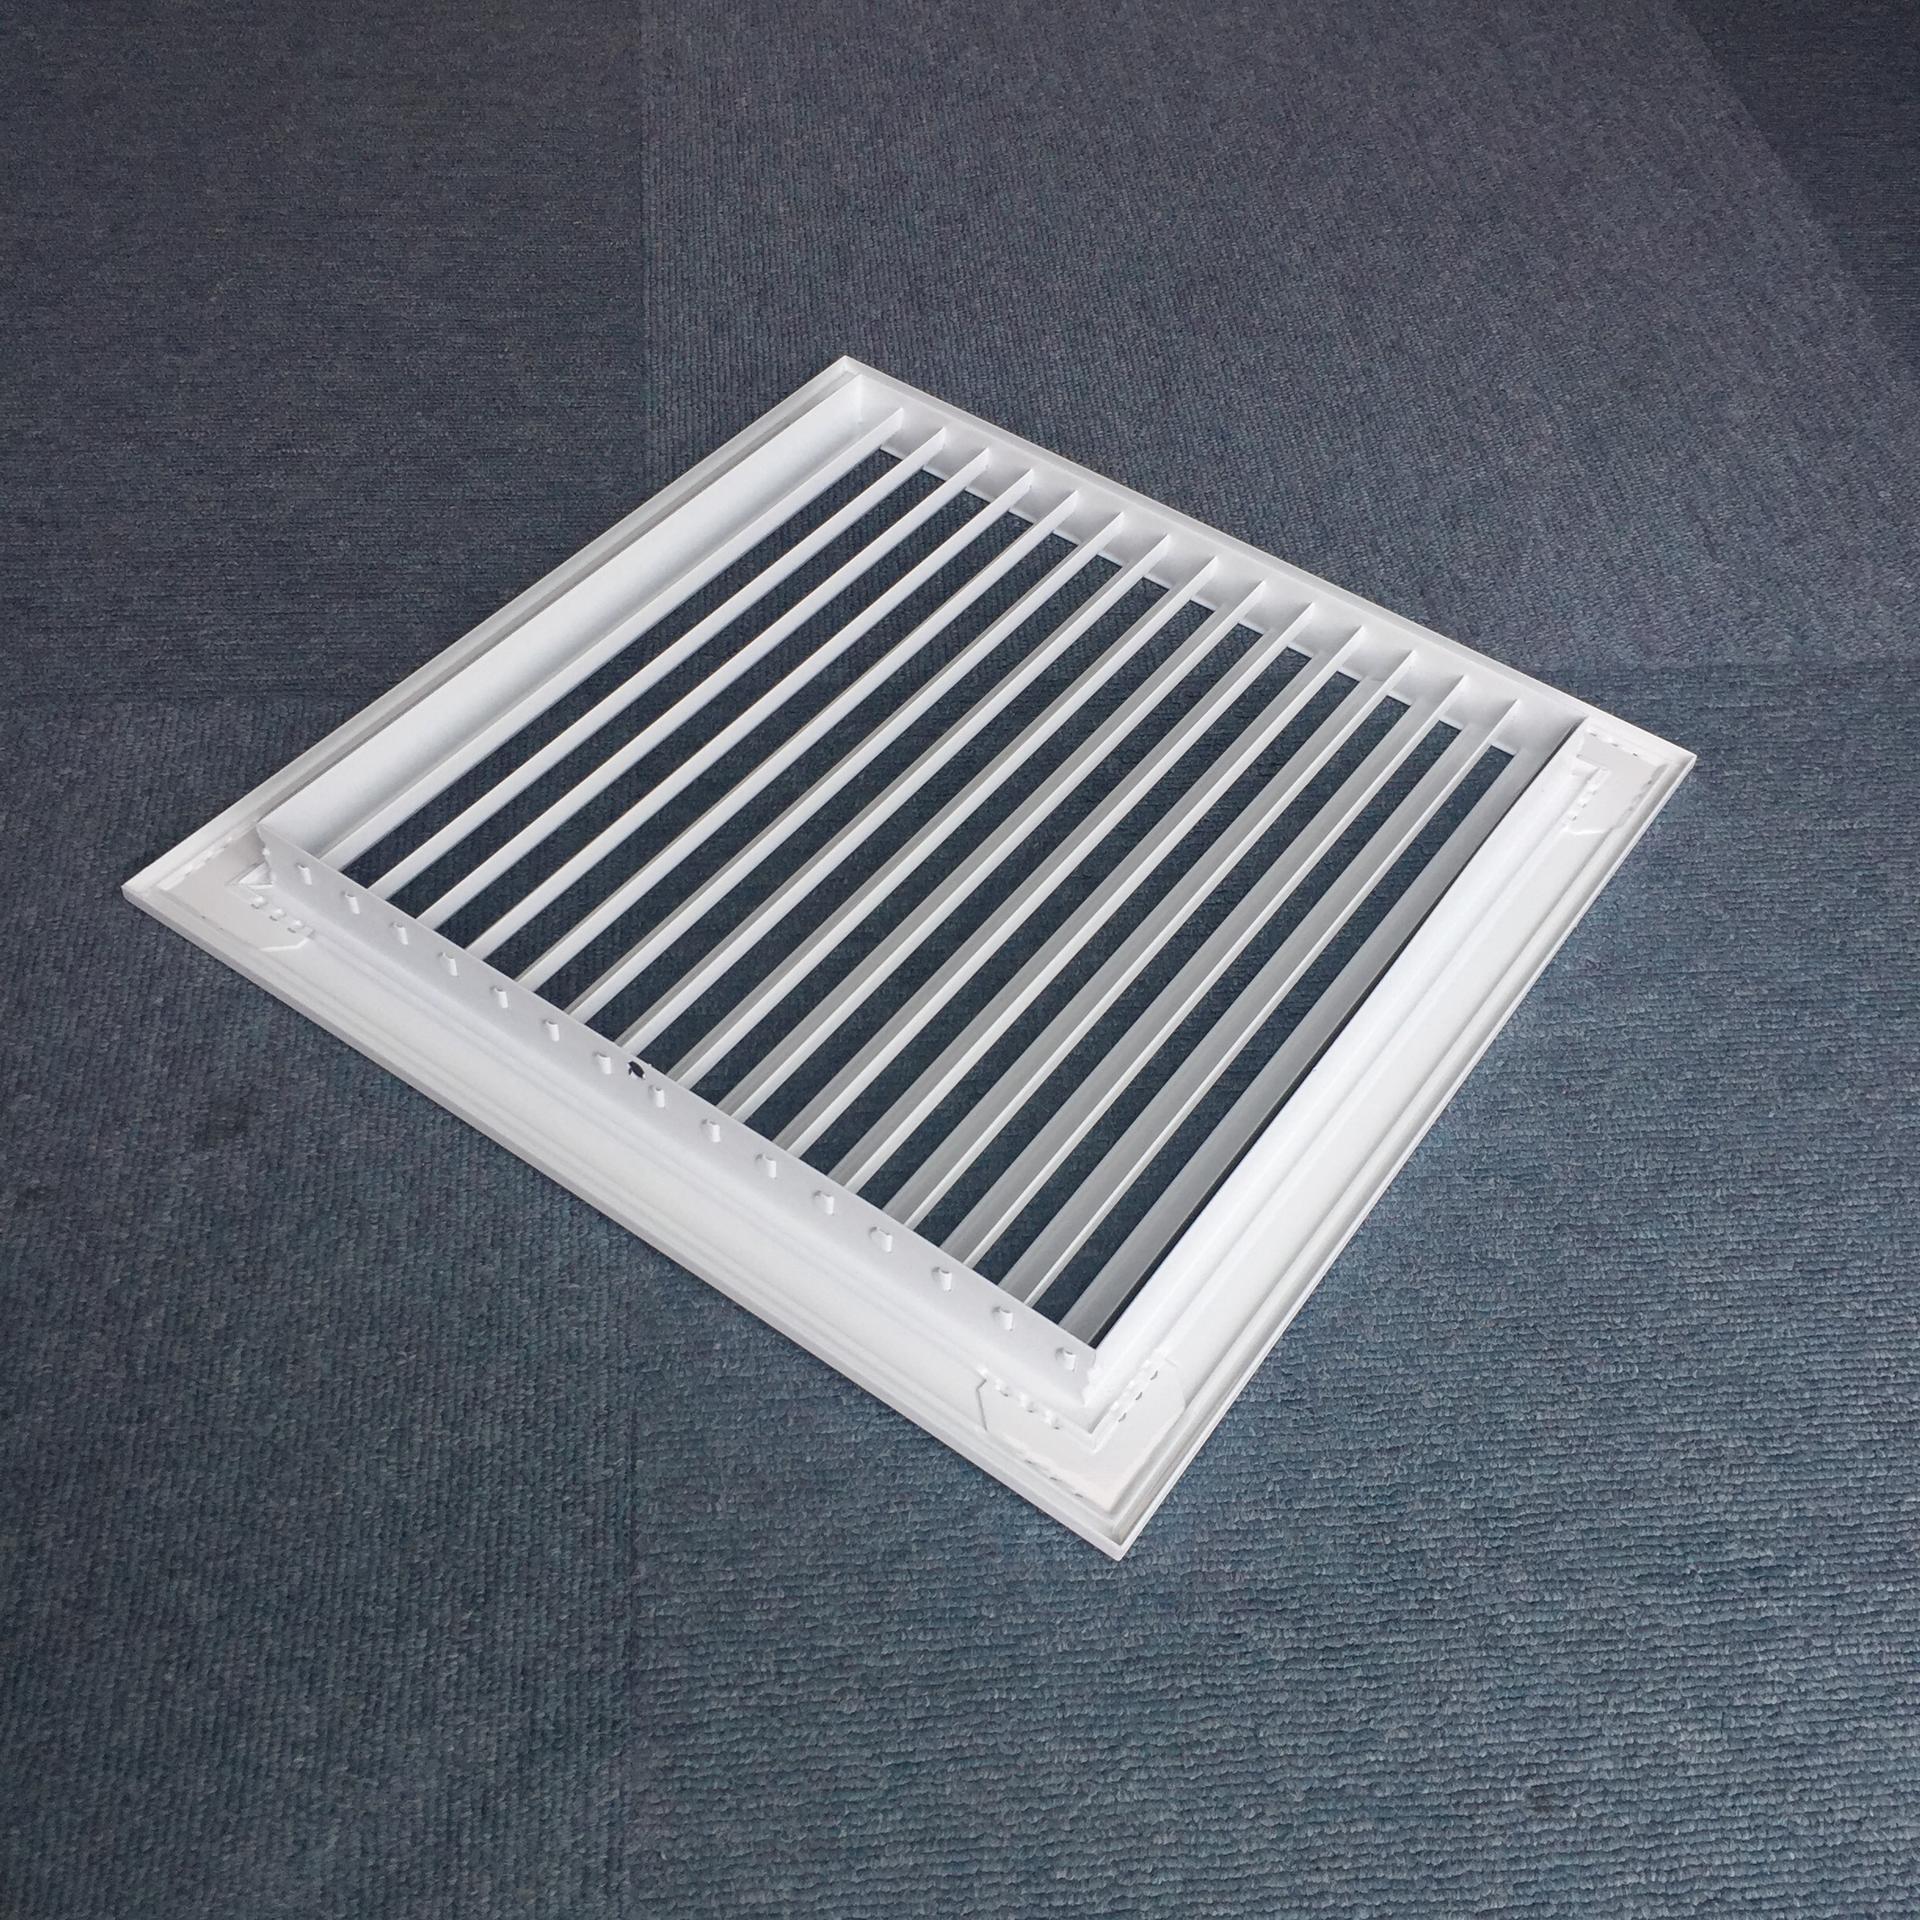 HVAC System Powder Coated Filter Mounted Air Vent Return Air Grille For Ventilation